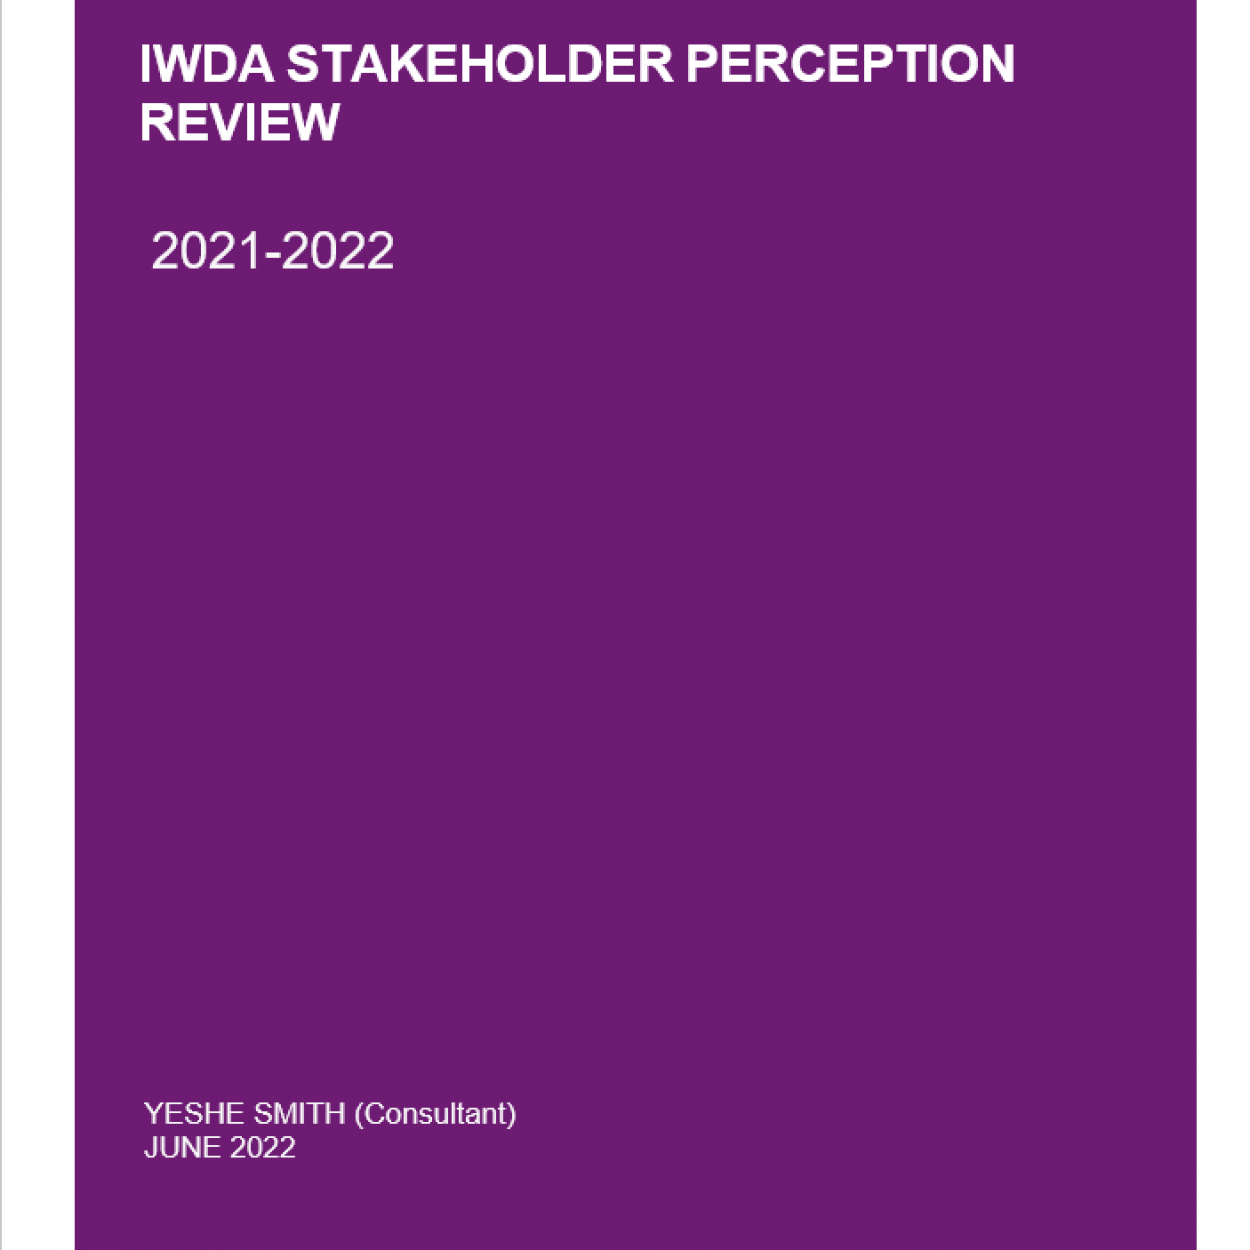 Cover page of the stakeholder perceptions document